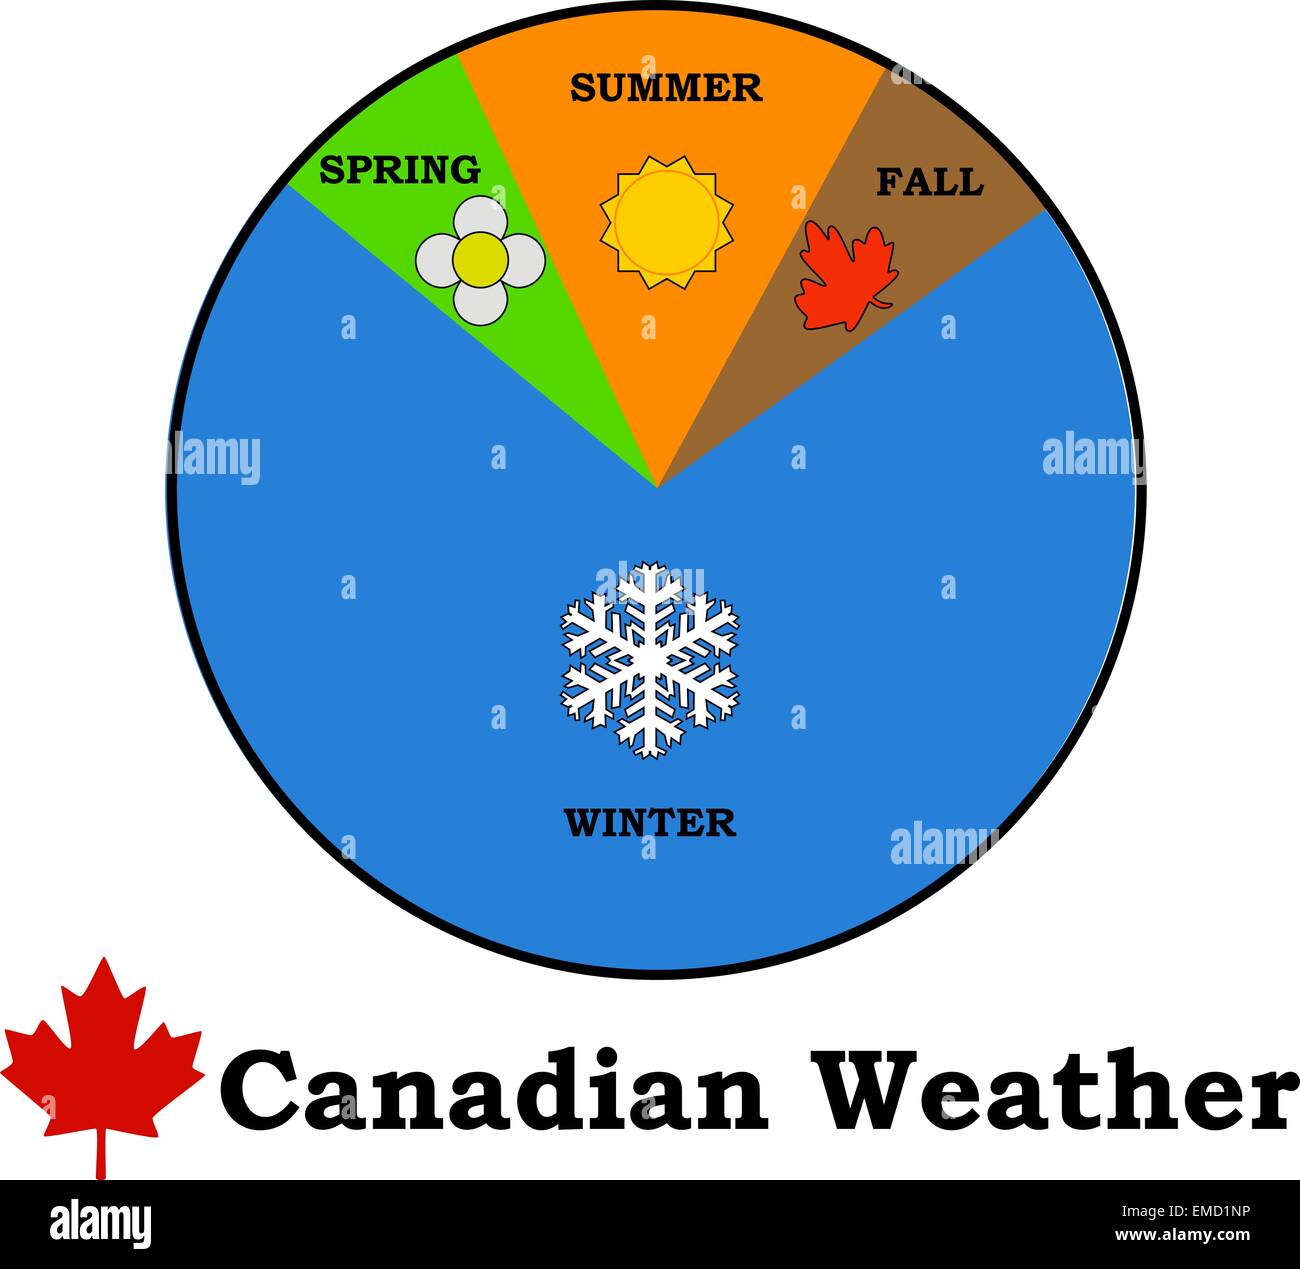 14,930 Canadian Weather Royalty-Free Photos and Stock Images